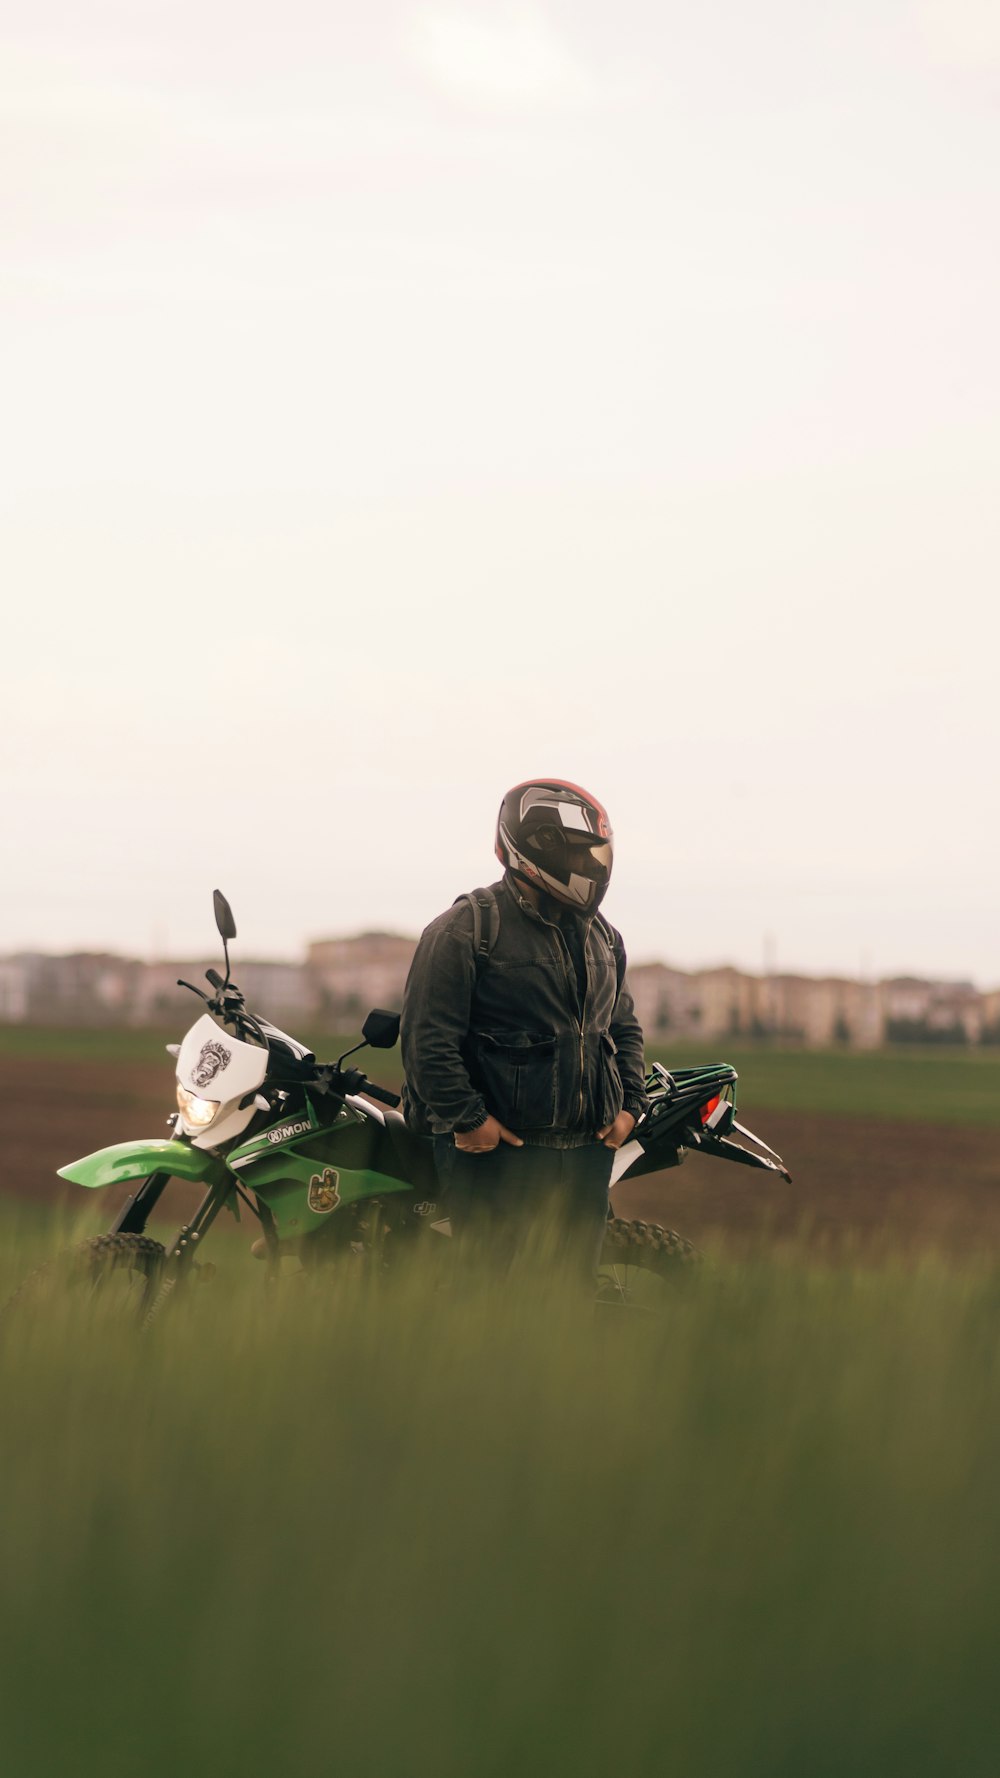 a man sitting on a motorcycle in a field